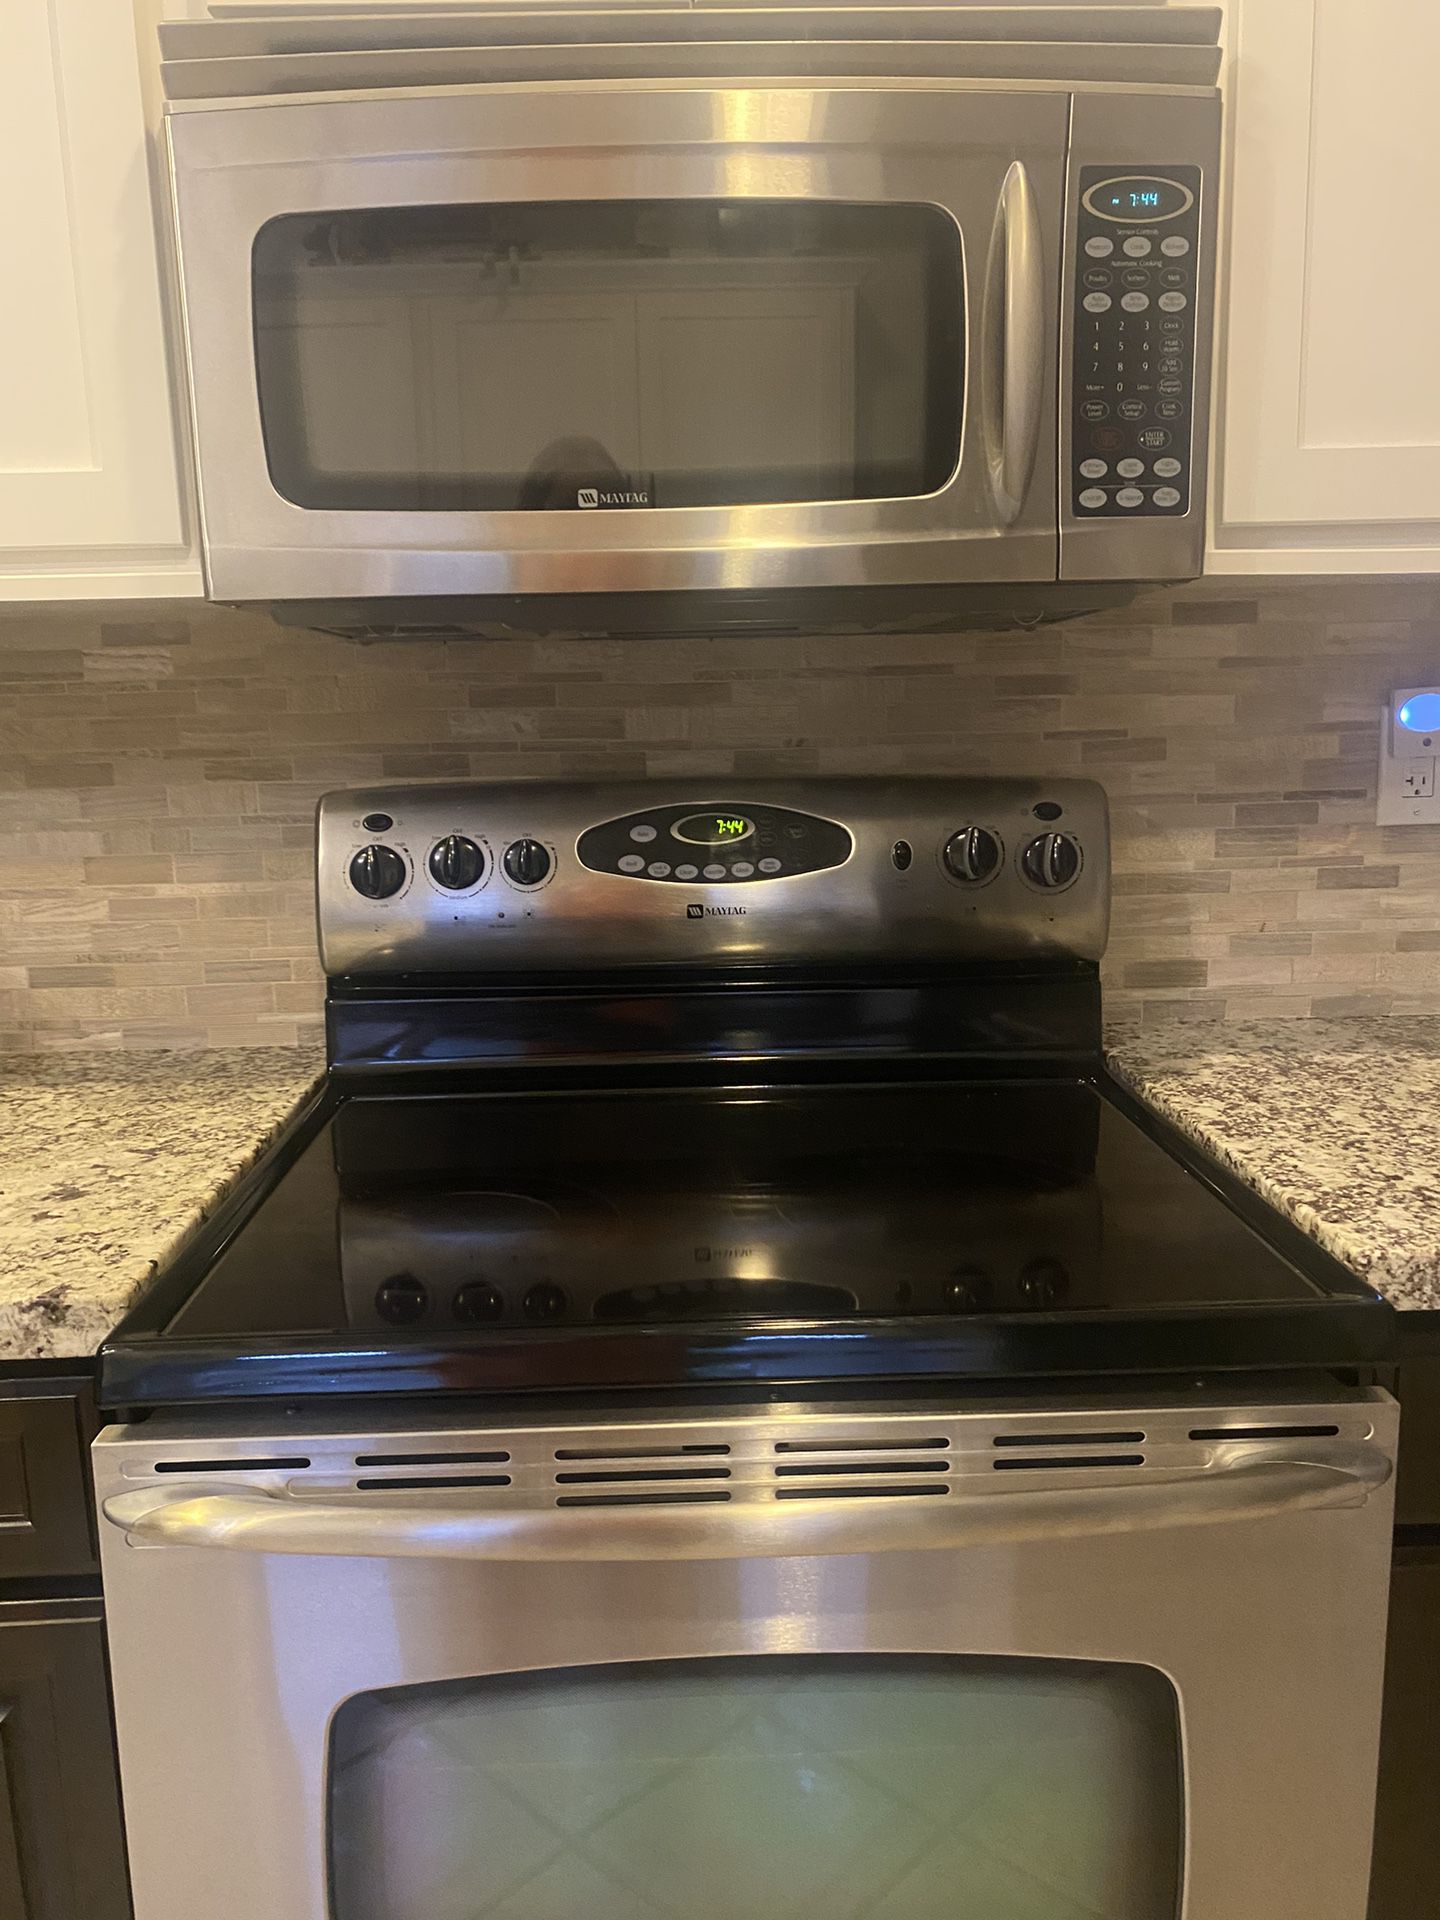 Maytag Electric Stove/oven and Microwave Oven